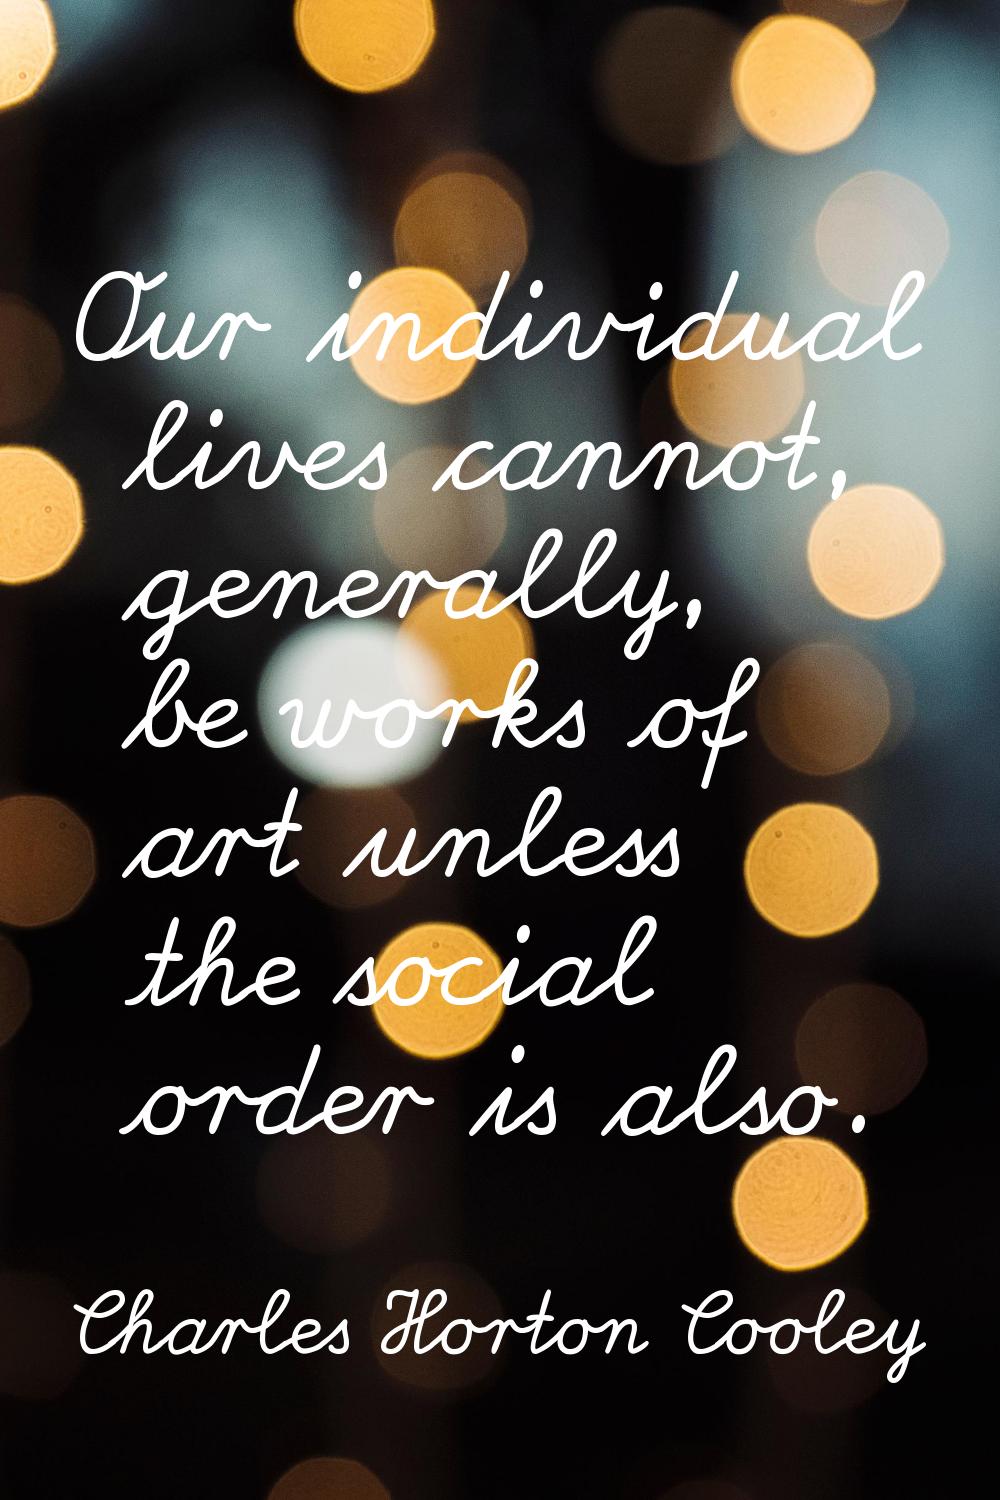 Our individual lives cannot, generally, be works of art unless the social order is also.